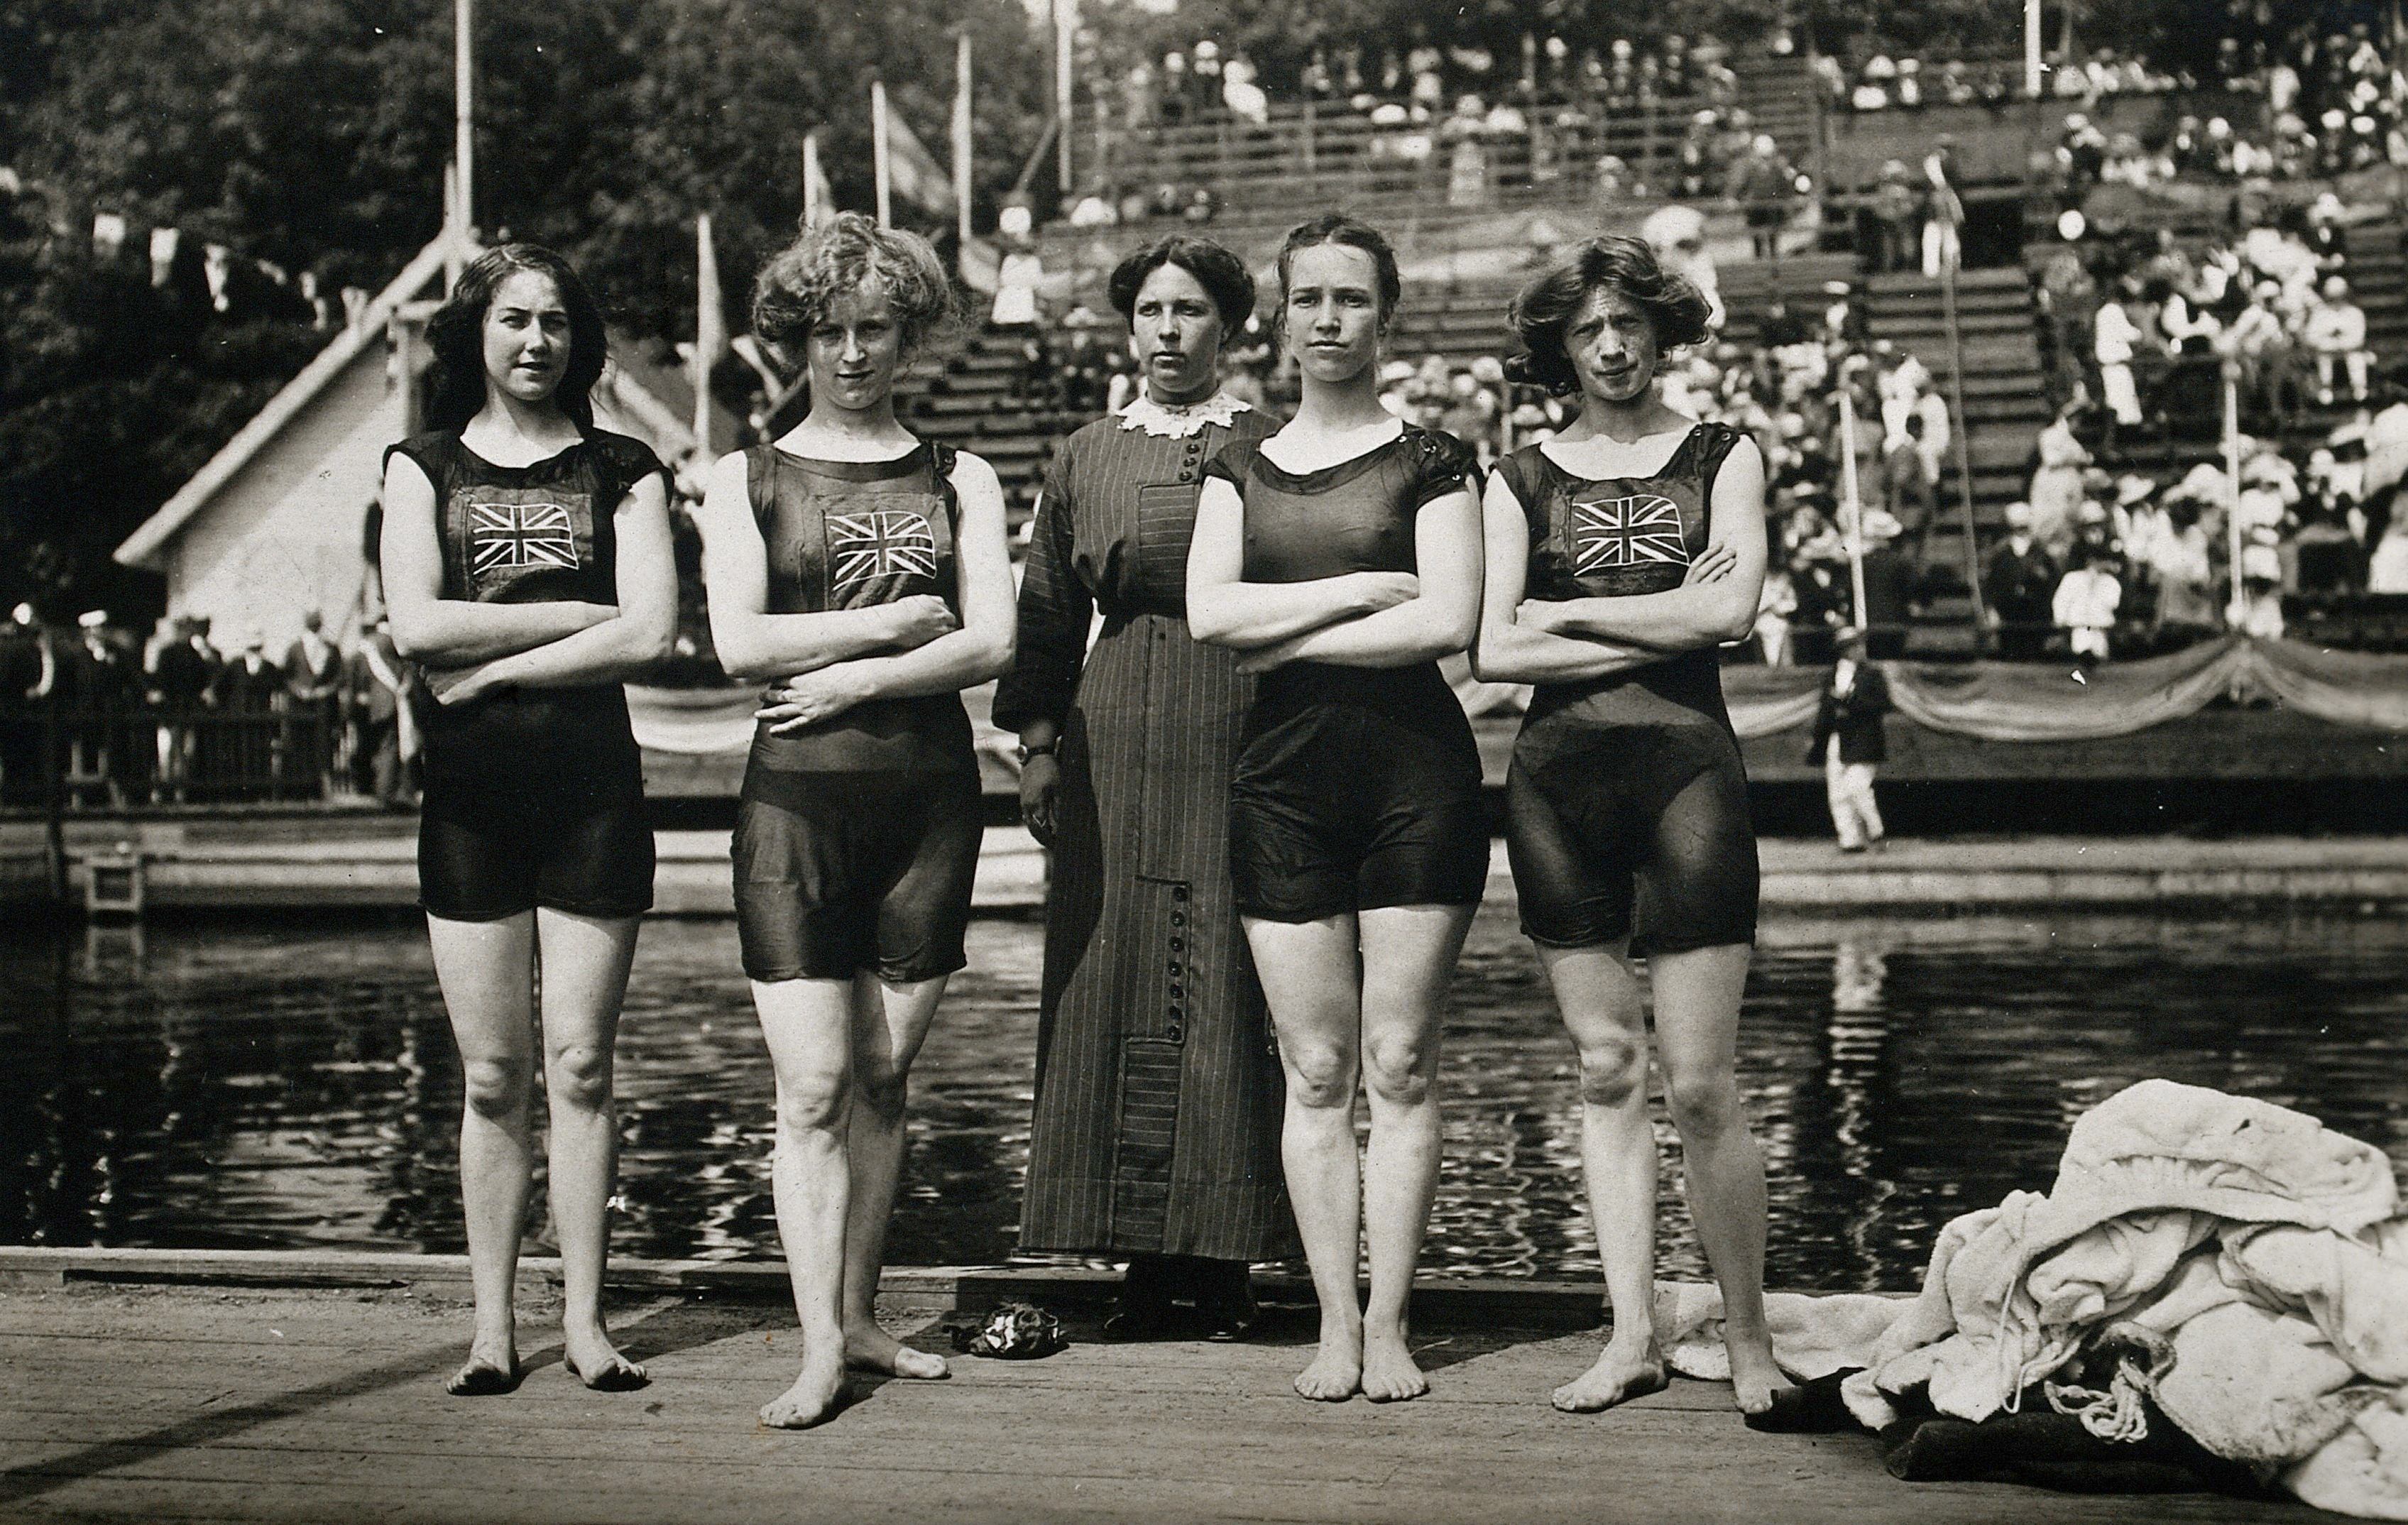 Belle Moore, Jennie Fletcher, Annie Speirs, and Irene Steer pose for a picture during the Stockholm Olympics in Sweden in 1912. The British swimming squad took home gold in the 4x100 Relay. 